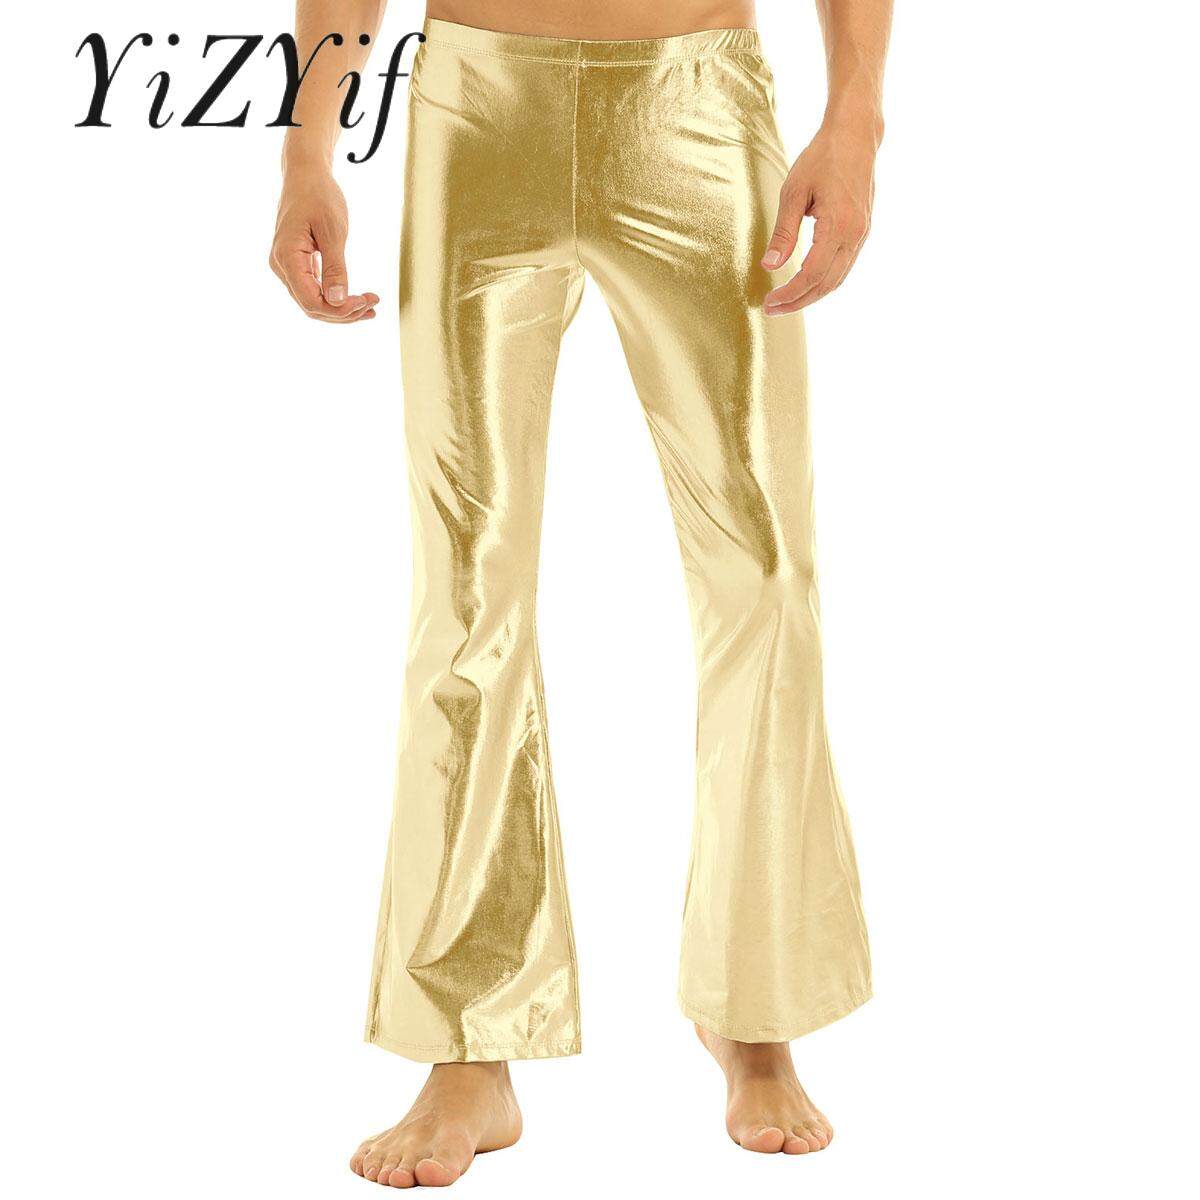 2092 Bell Bottom Pants For Men Stock Photos HighRes Pictures and Images   Getty Images